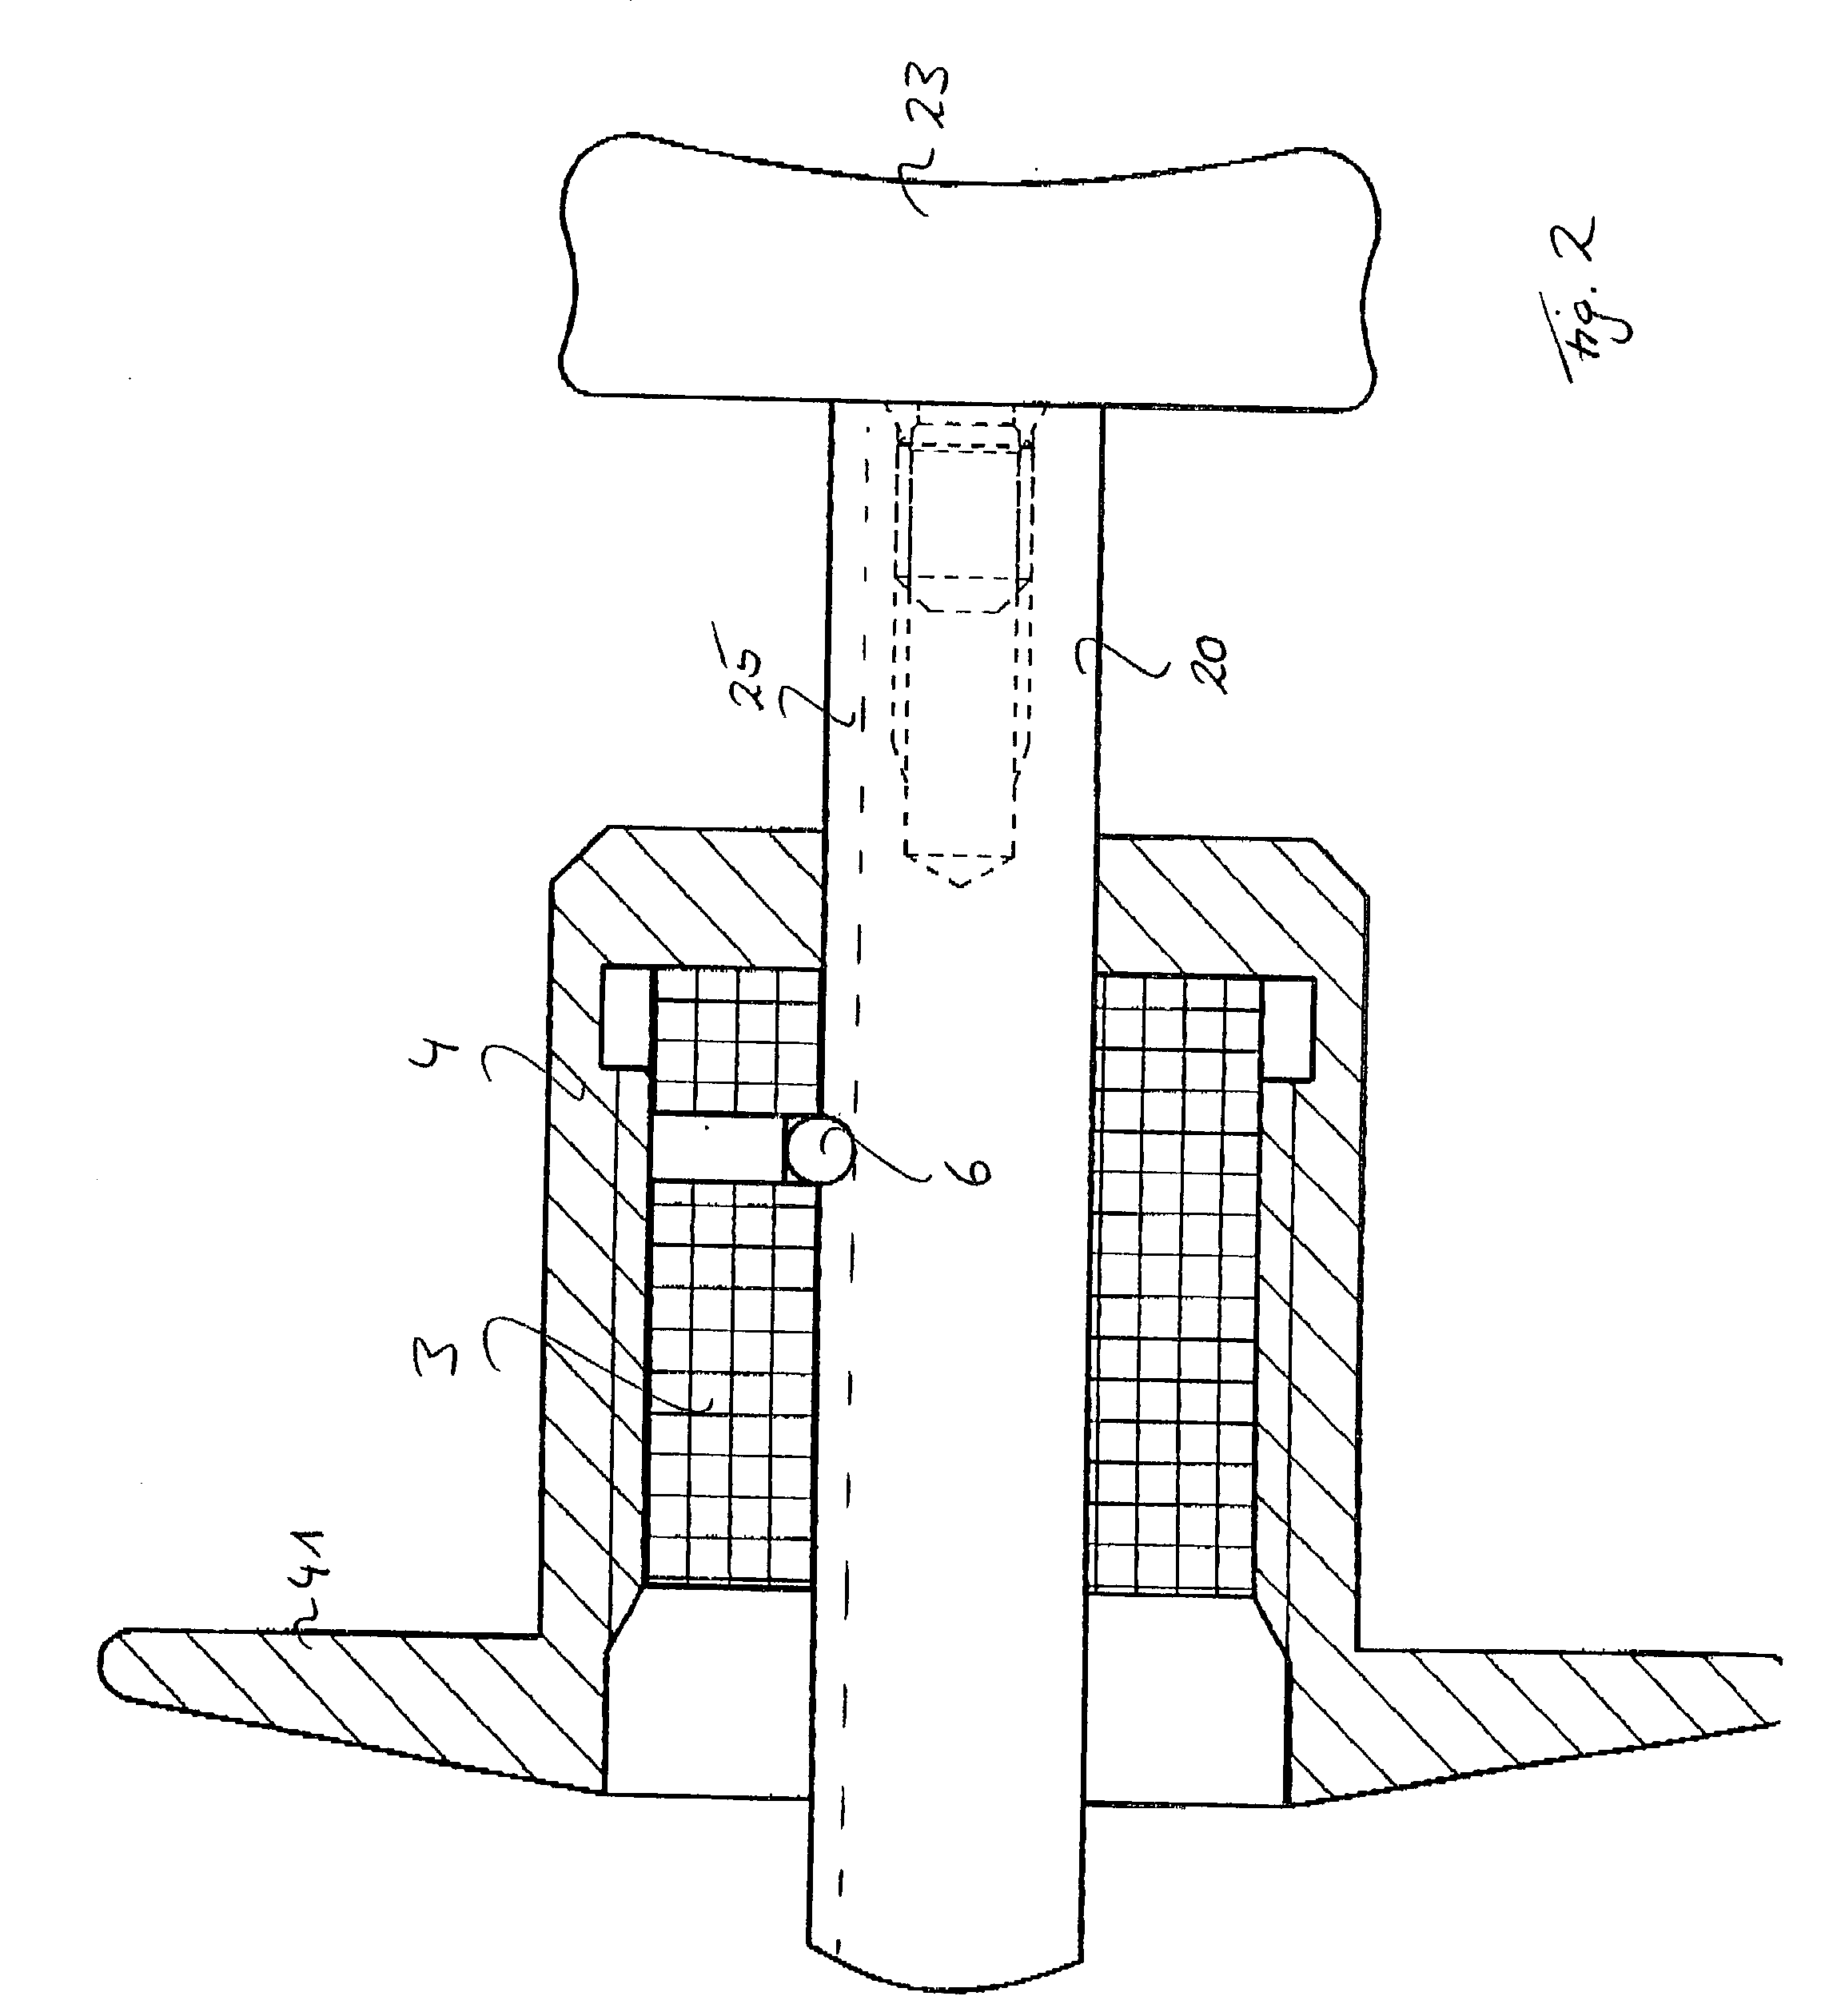 Device for inserting a lens into an eye